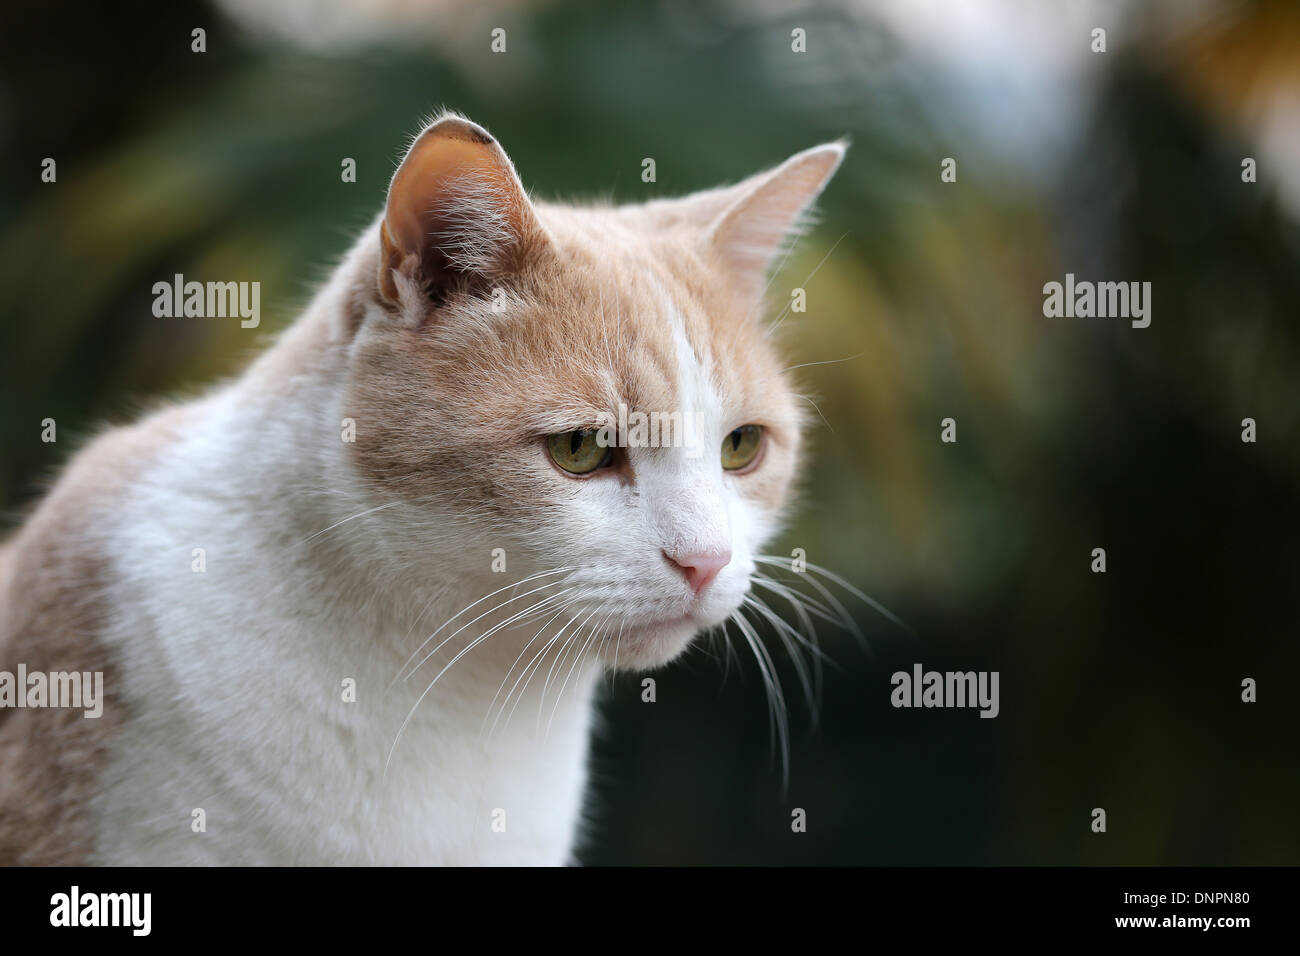 Cat face portrait. Pet. White beige red cat. Domestic cat. Closeup with bokeh. Italy. Europe. Stock Photo